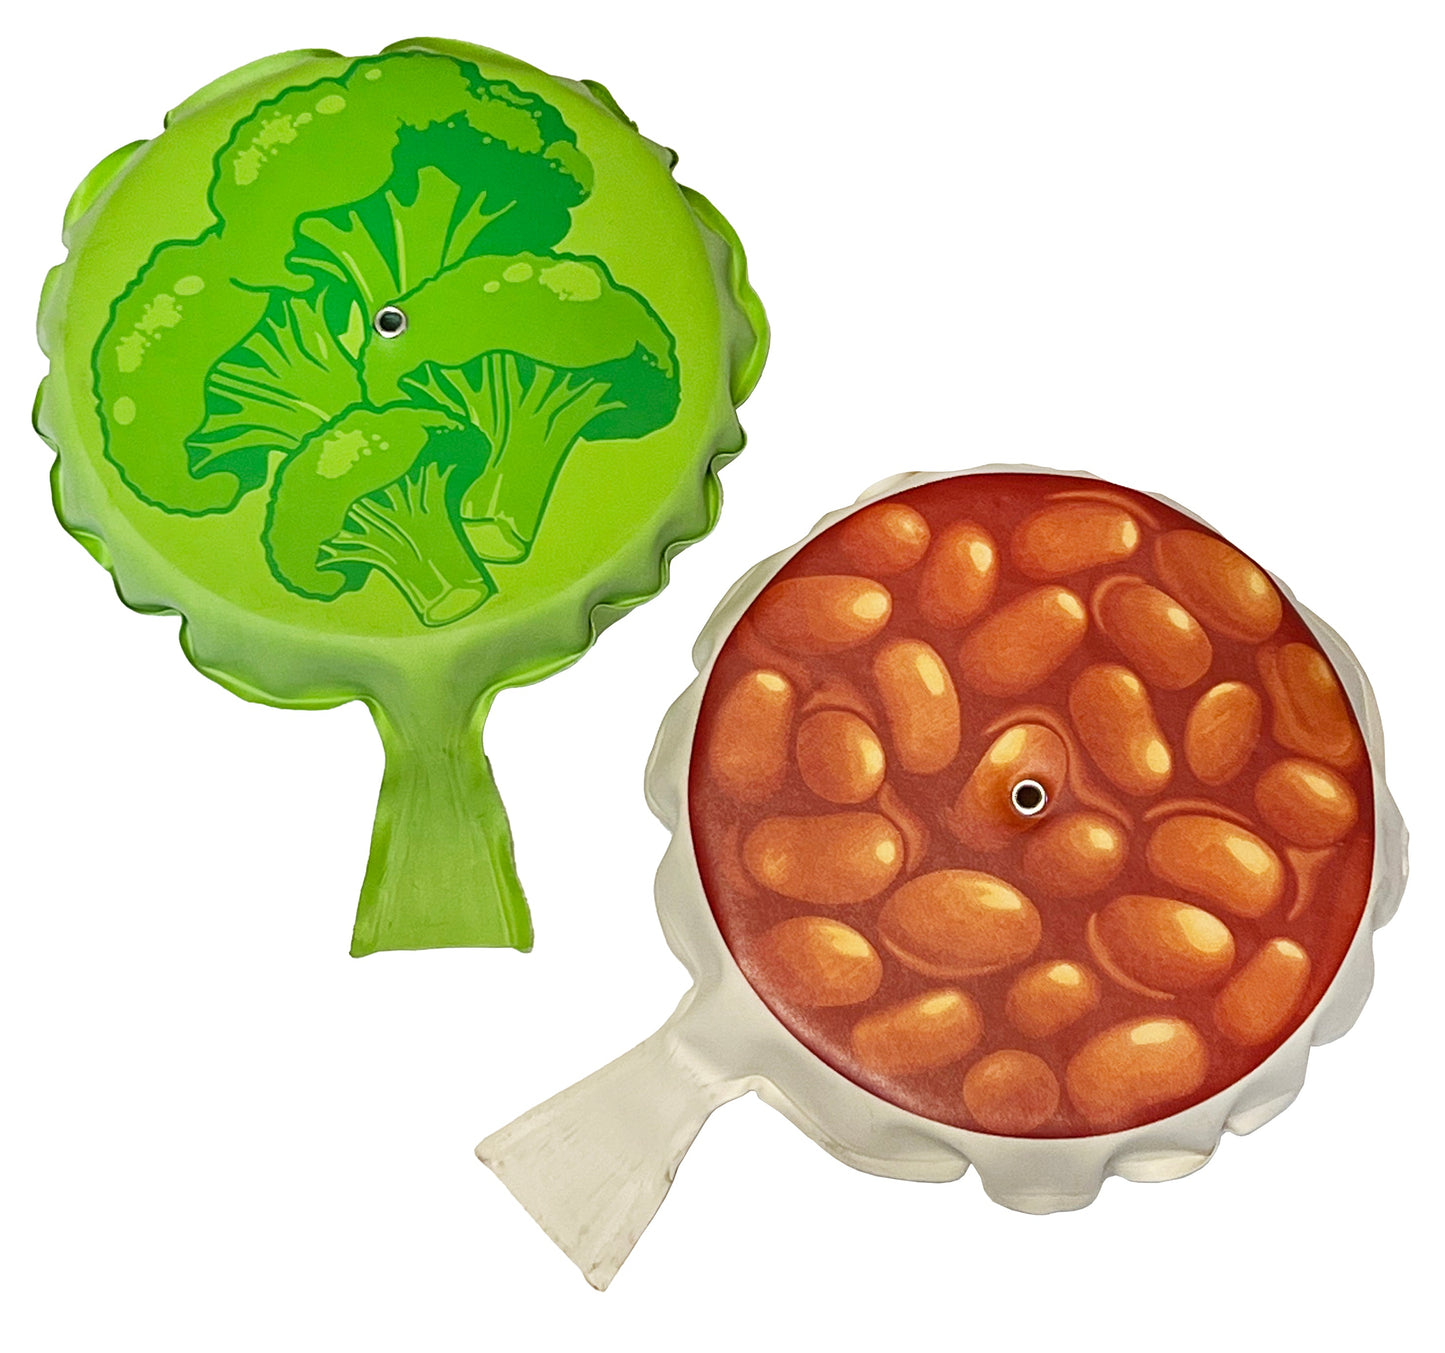 Whoopie Cushions - Broccoli or Baked Beans